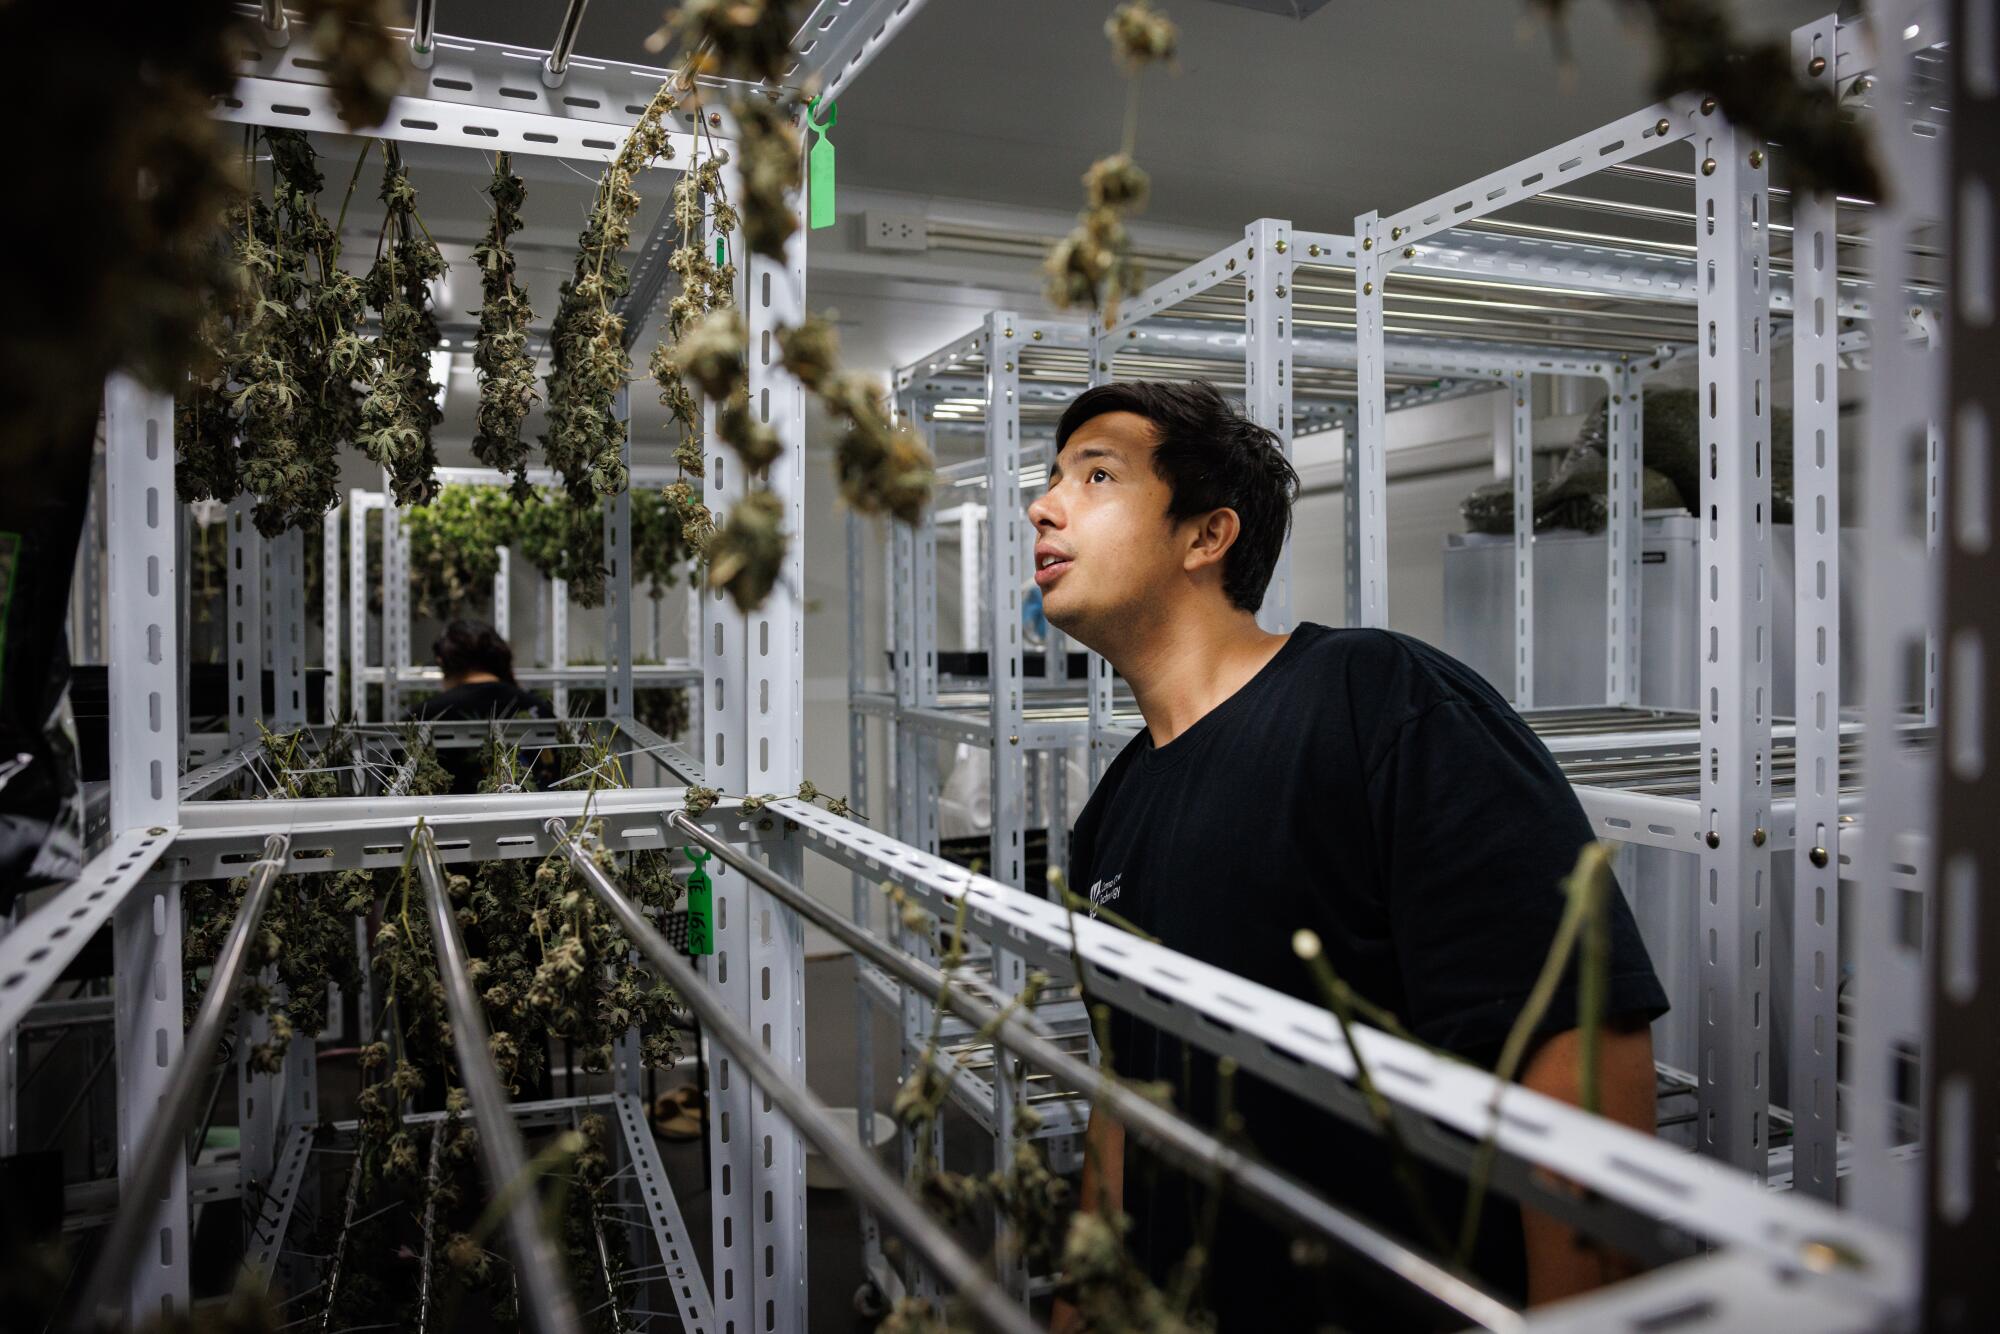 A man in a dark shirt looks at bundles of plants hanging from a metal rack